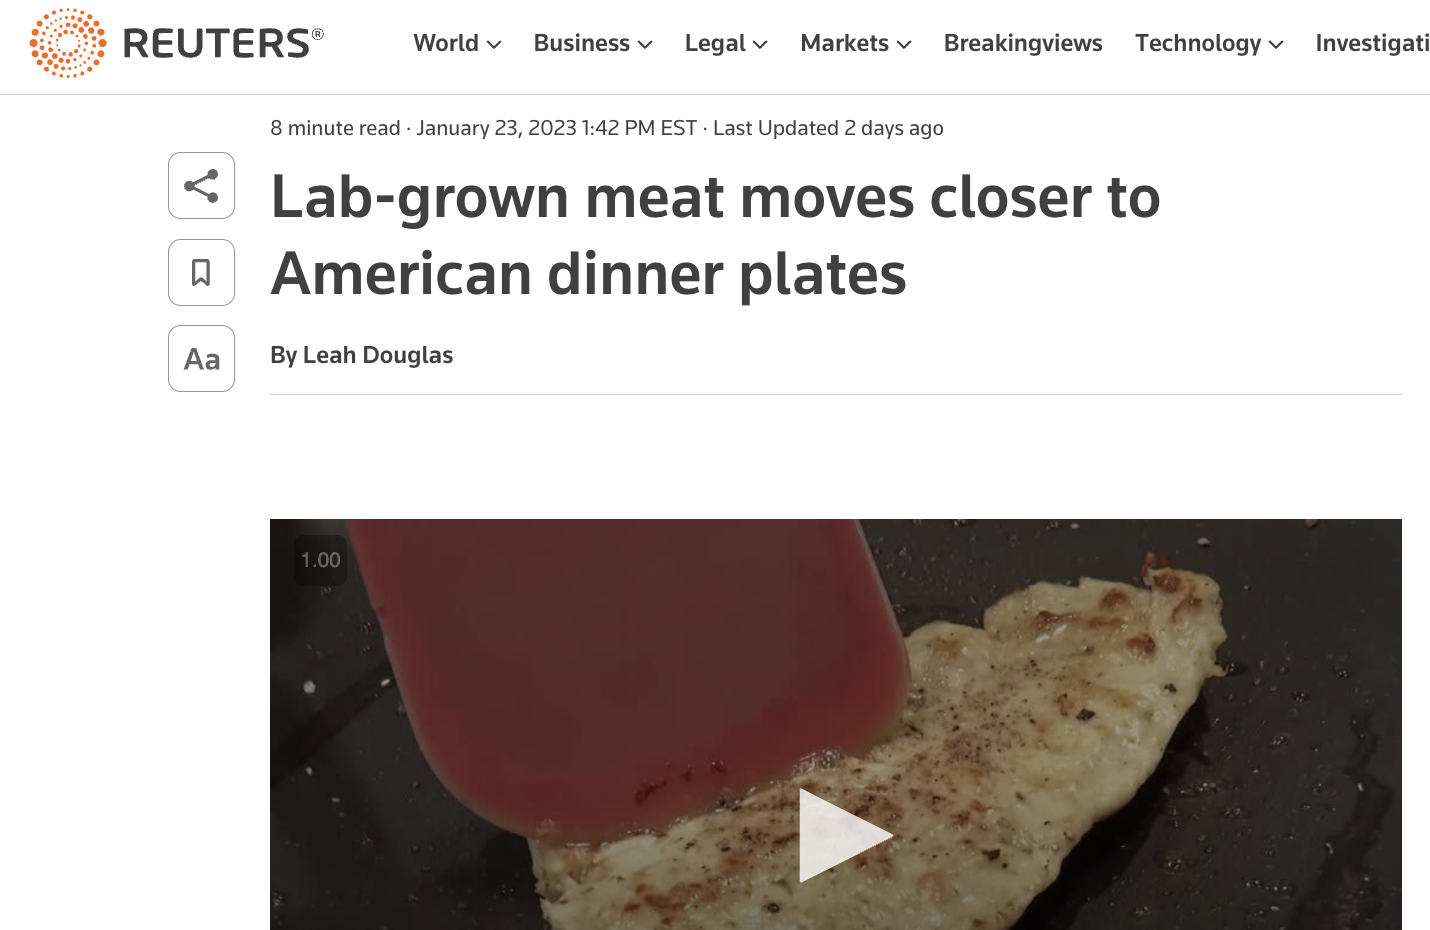 The Great Food Reset: ‘Lab-grown meat’ harvested in ‘massive steel vats’ edges closer to fed approval & U.S. dinner plates – As EU approves human consumption of worms & crickets